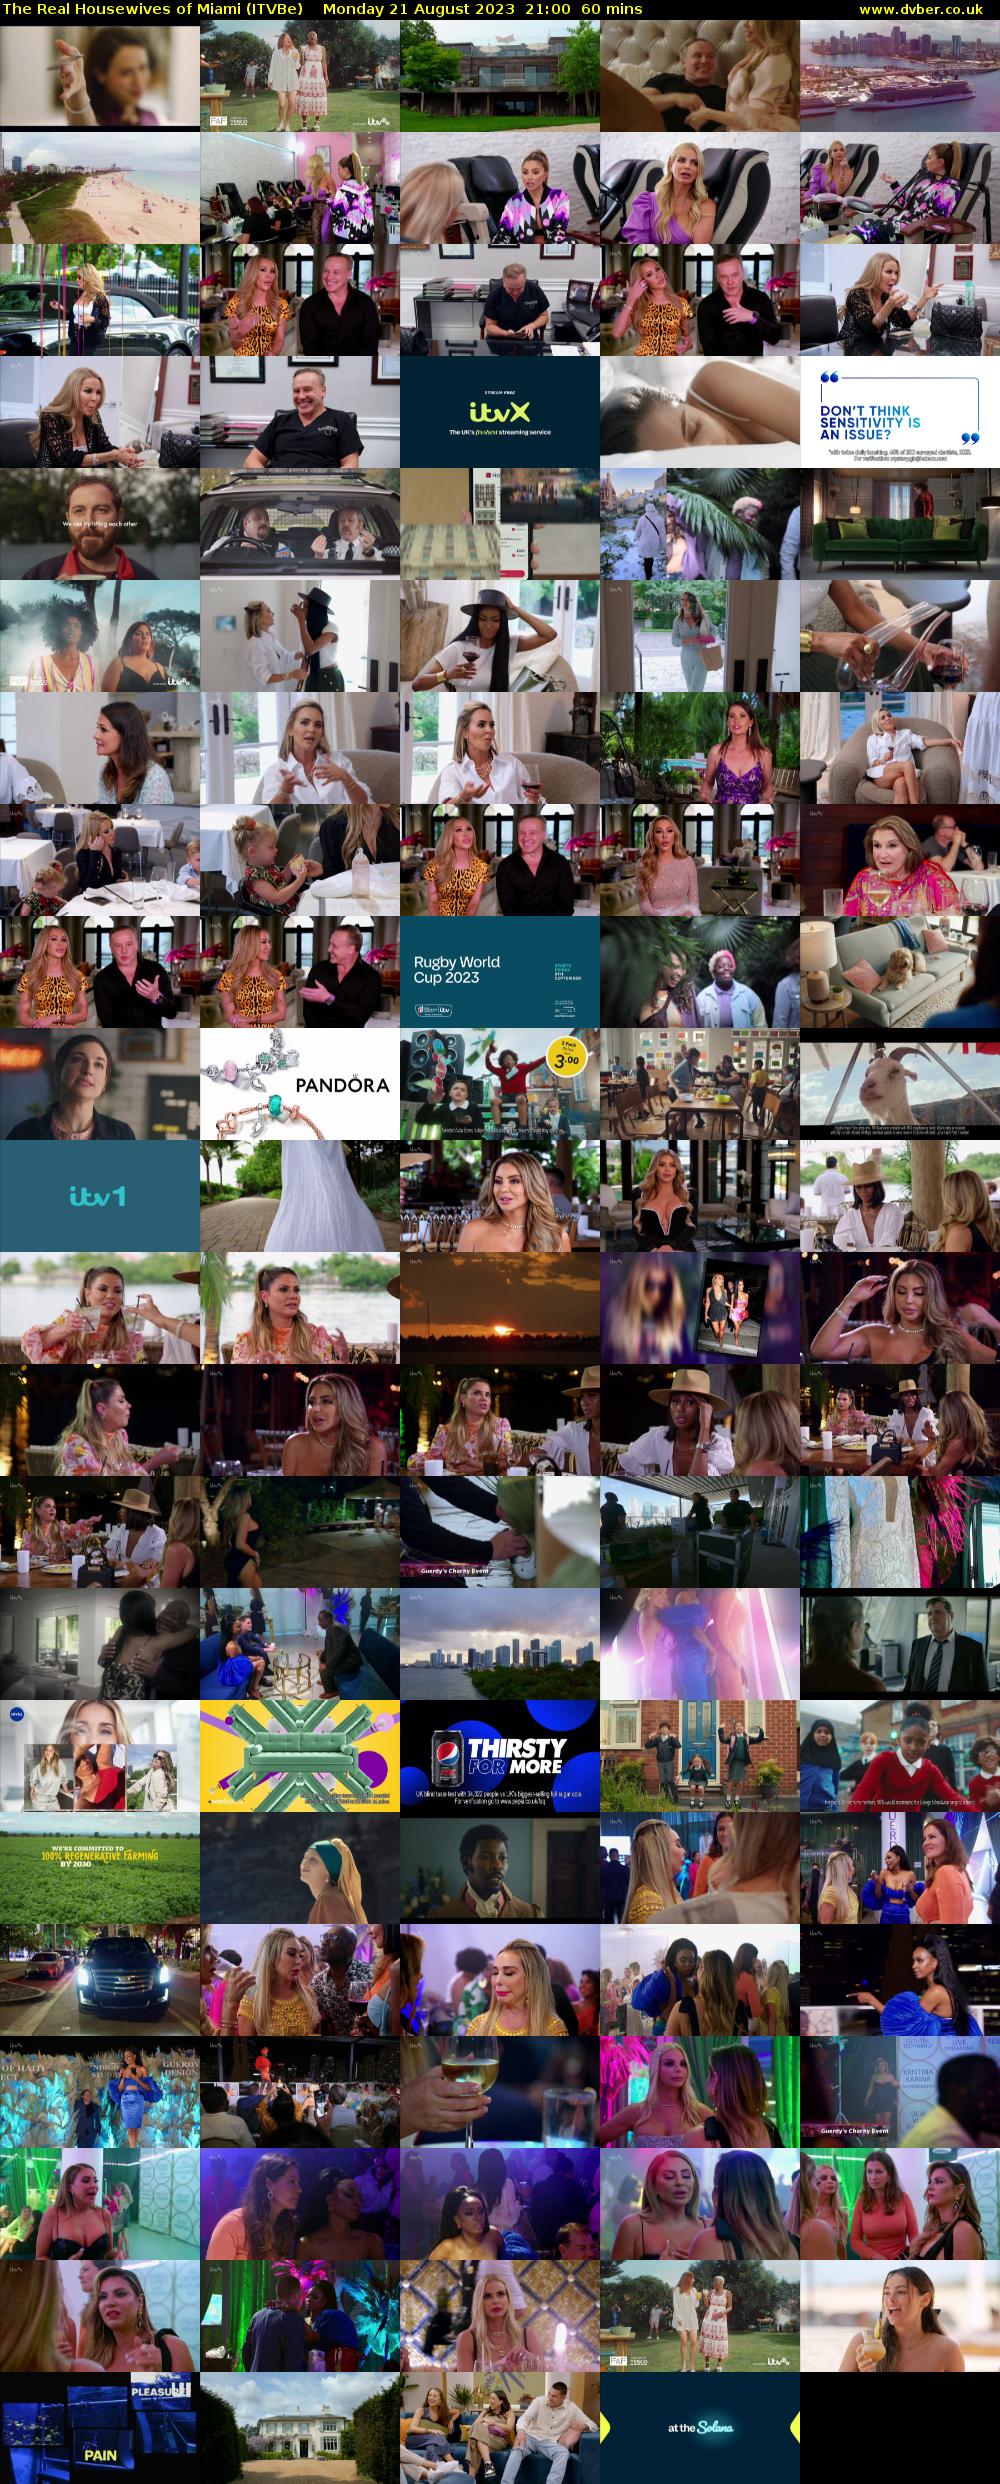 The Real Housewives of Miami (ITVBe) Monday 21 August 2023 21:00 - 22:00